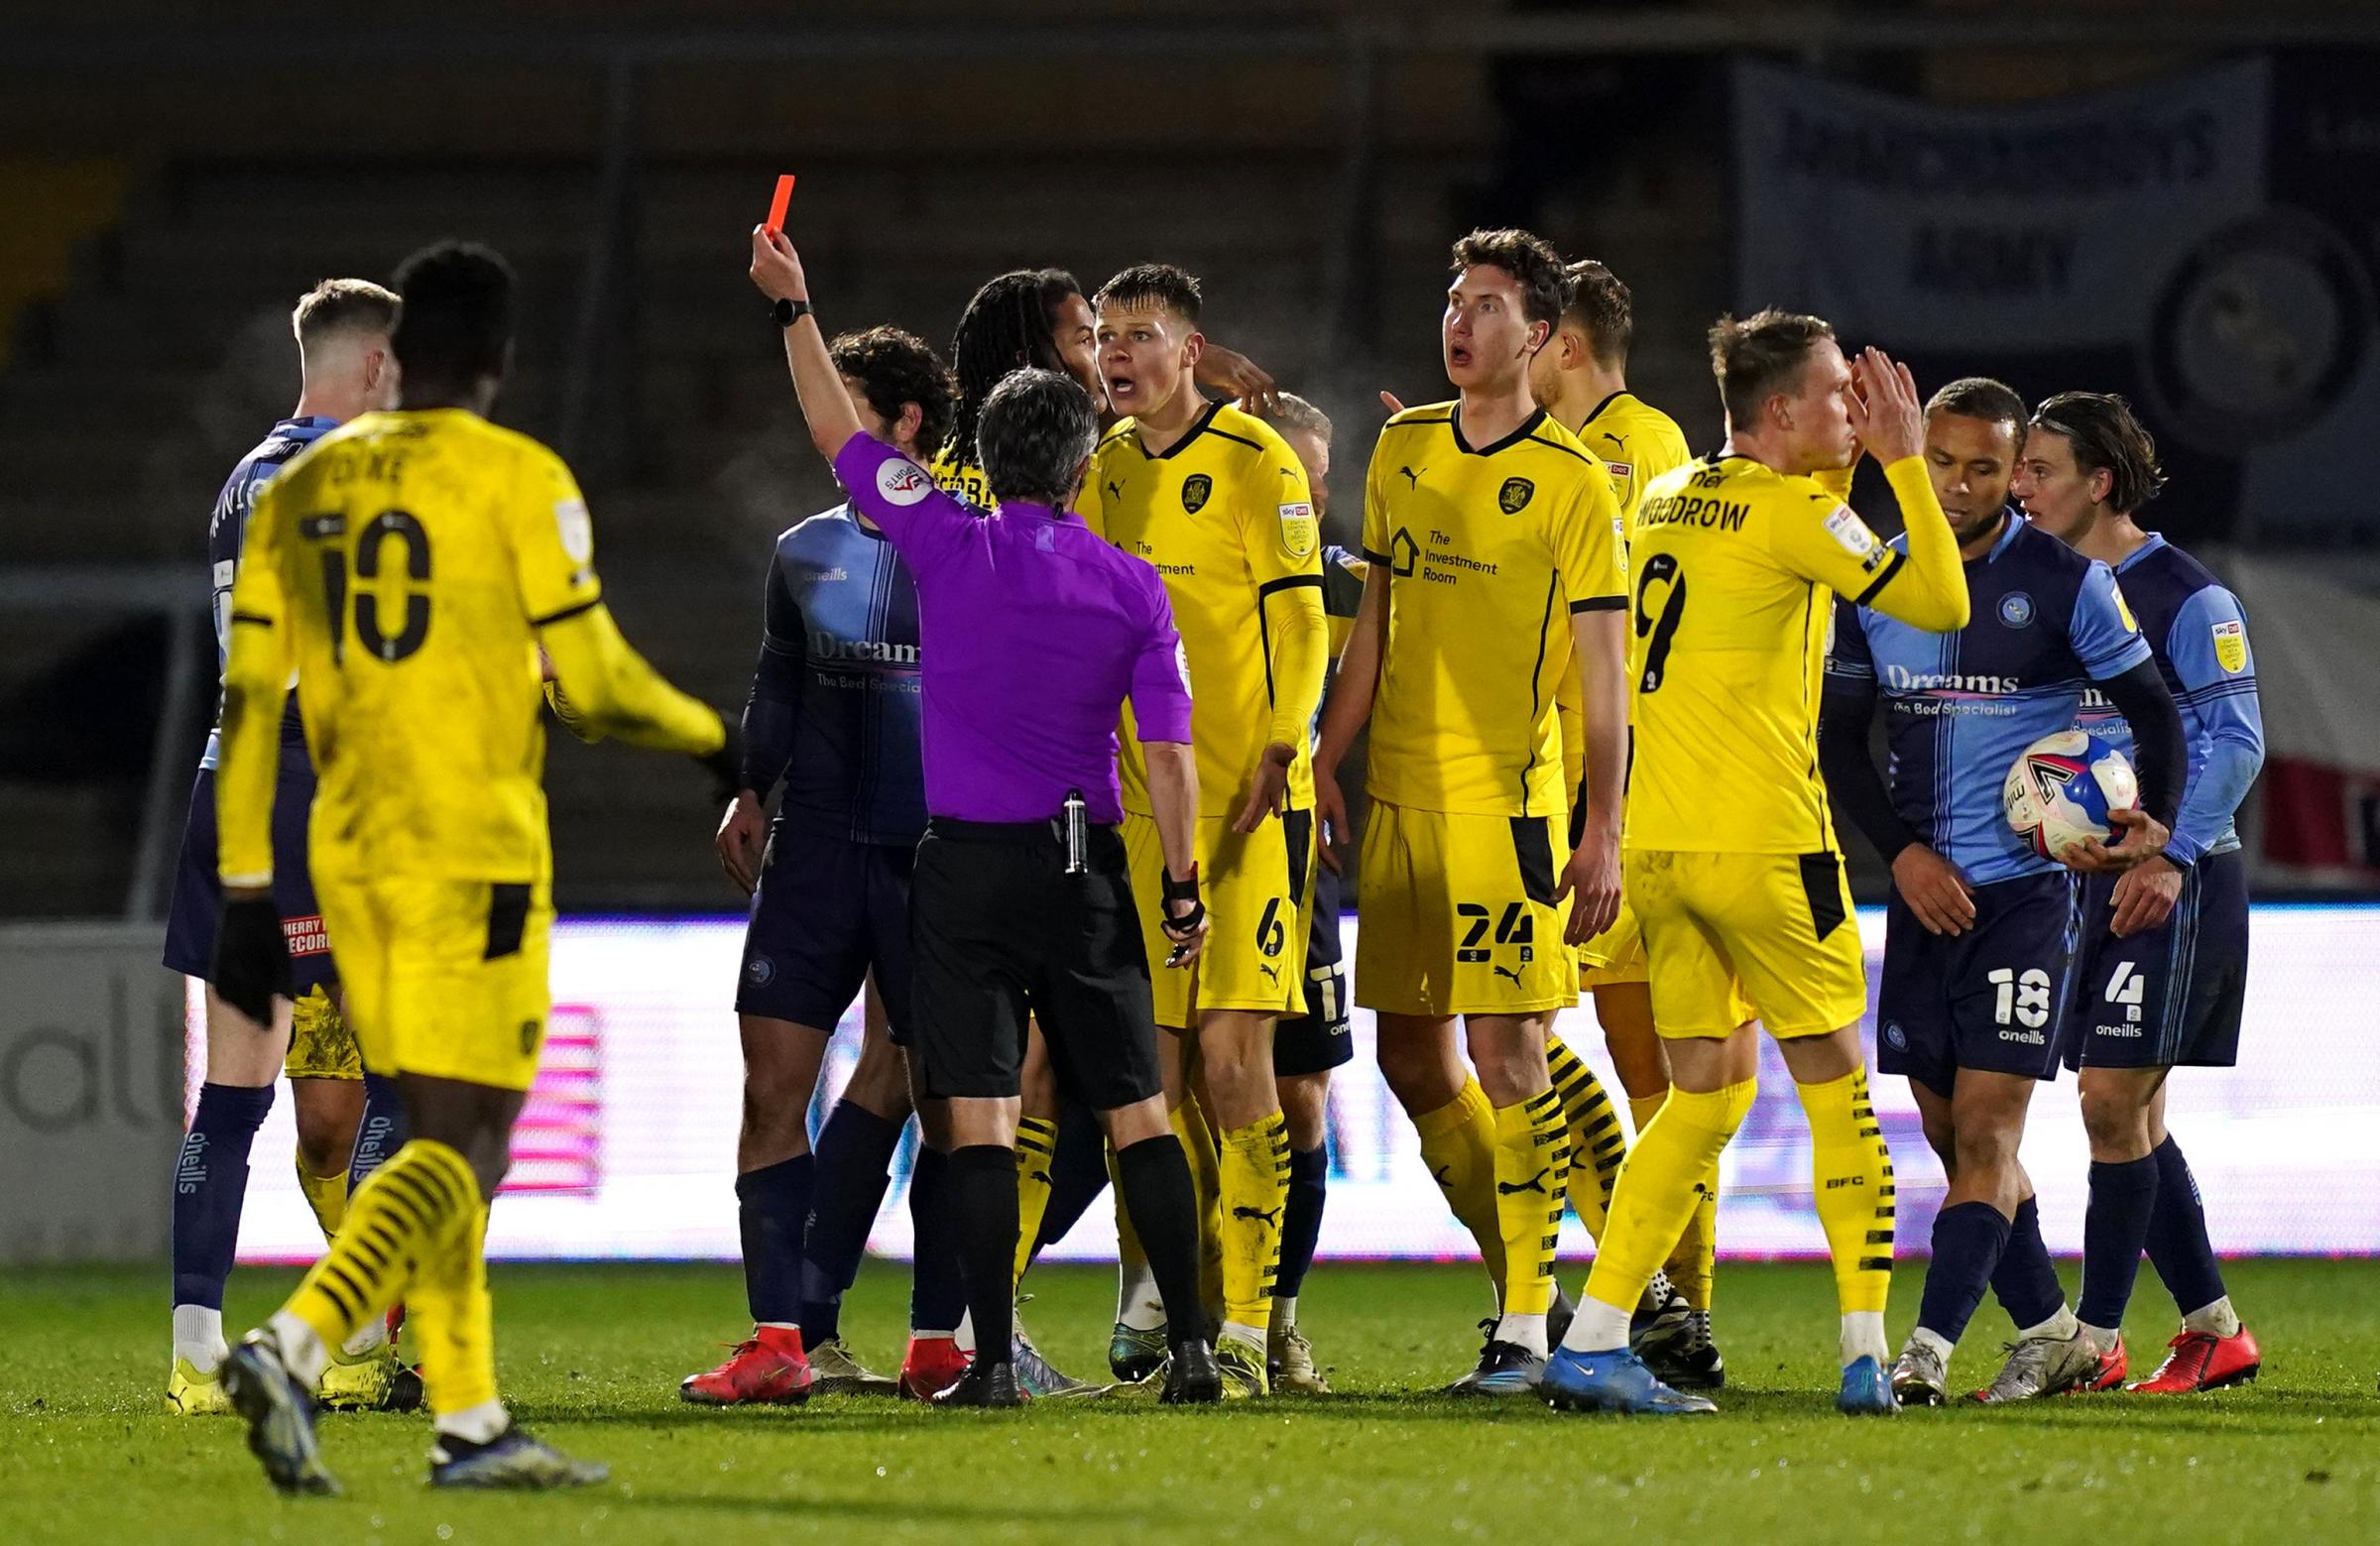 Tempers flared as Alex Mowatt was shown a straight red card against Wycombe on Wednesday night (John Walton/PA)